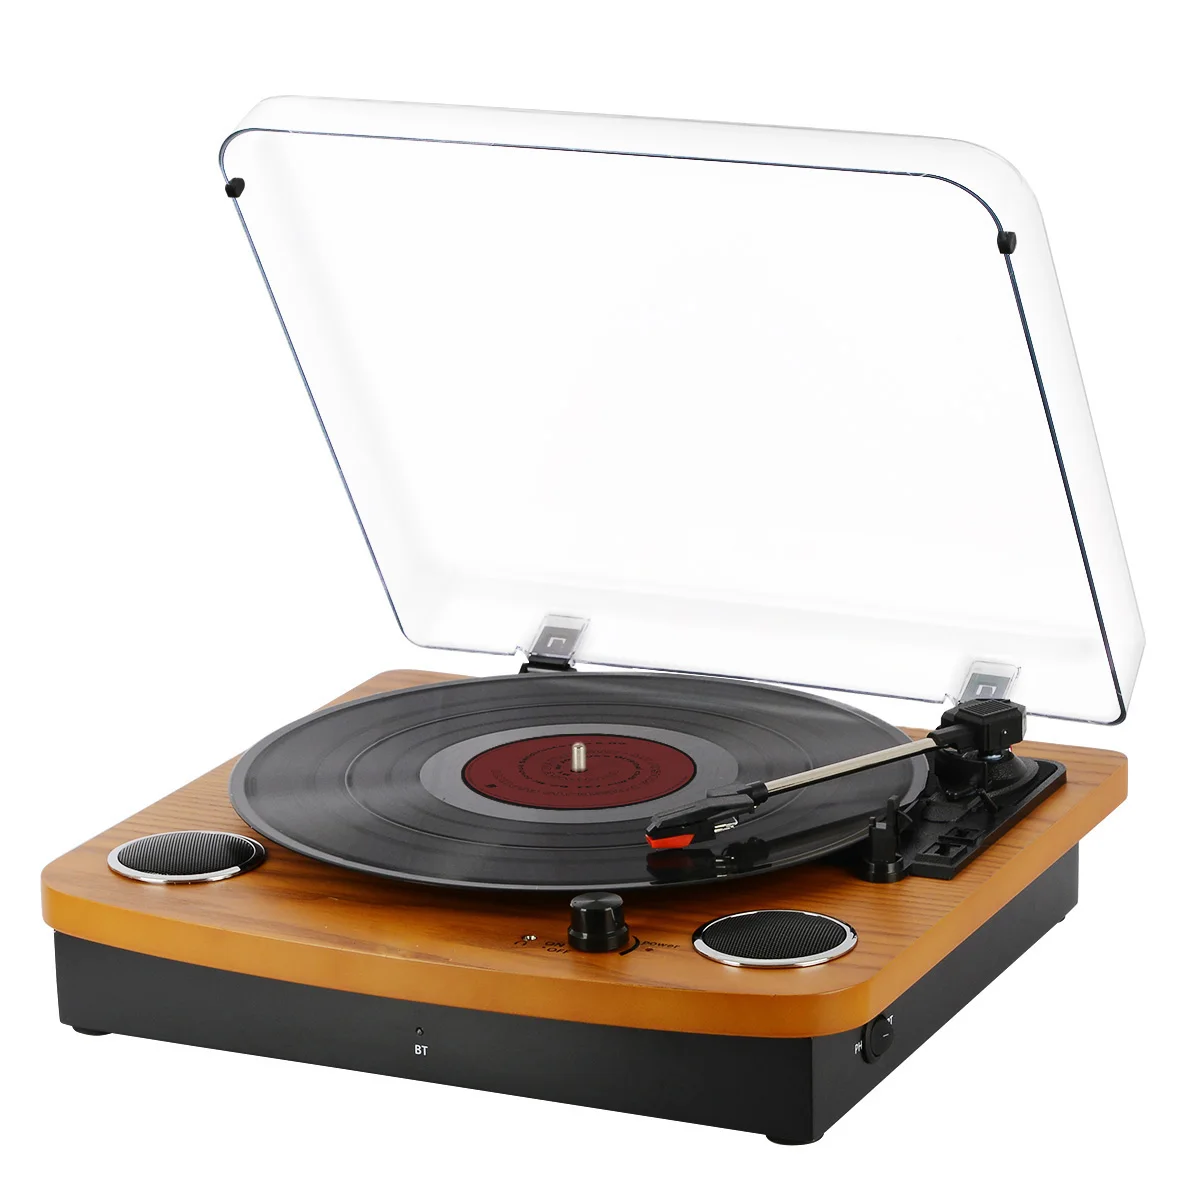 Wooden Nostalgic Stereo Record Player Vinyl Turntables Player With Recording Function Buy